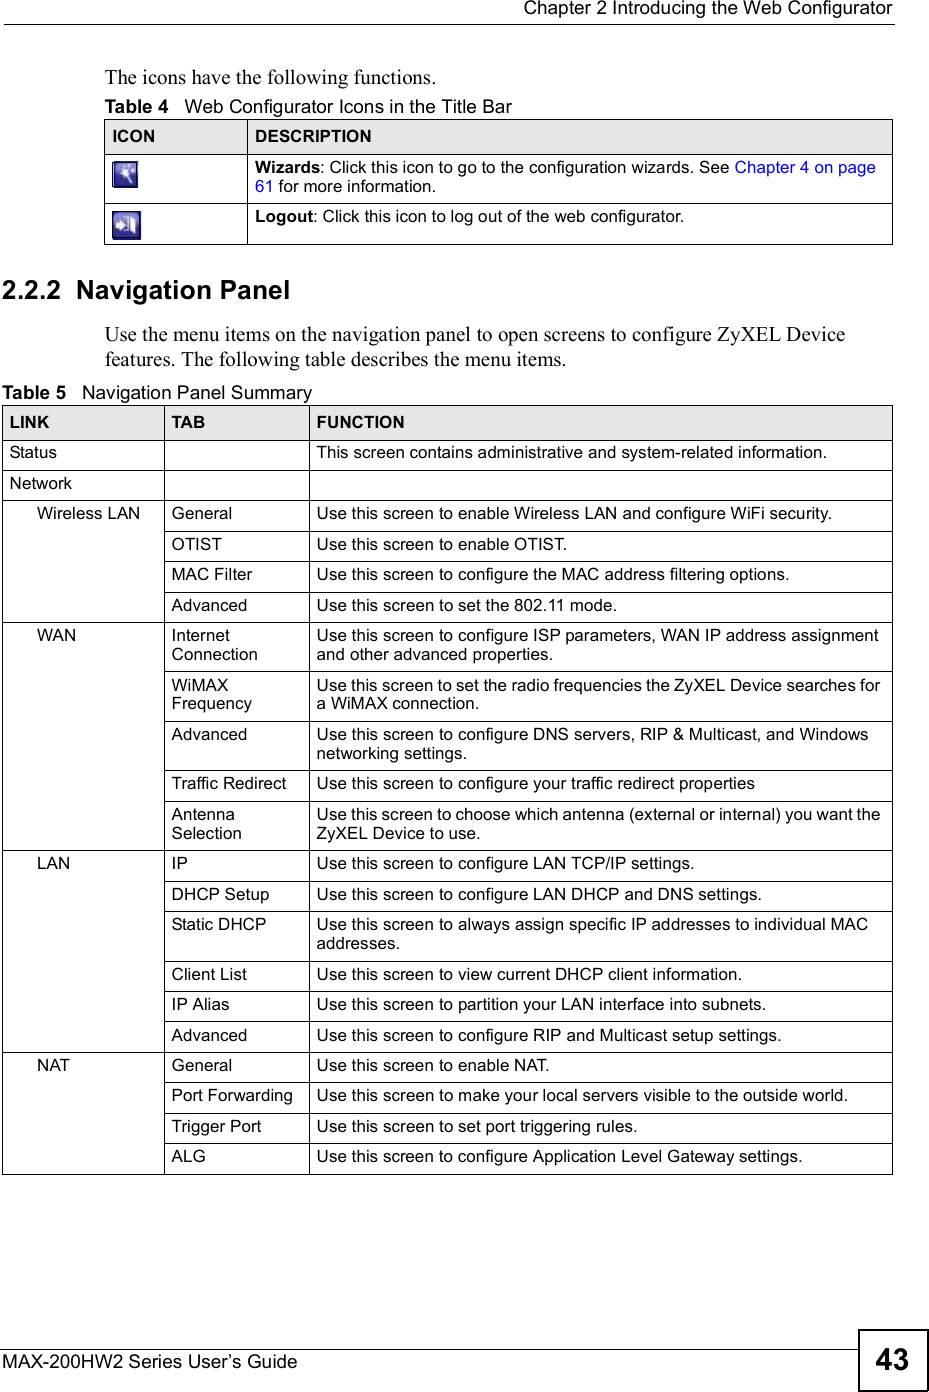  Chapter 2Introducing the Web ConfiguratorMAX-200HW2 Series User s Guide 43The icons have the following functions.2.2.2  Navigation PanelUse the menu items on the navigation panel to open screens to configure ZyXEL Device features. The following table describes the menu items.Table 4   Web Configurator Icons in the Title BarICON  DESCRIPTIONWizards: Click this icon to go to the configuration wizards. See Chapter 4 on page 61 for more information.Logout: Click this icon to log out of the web configurator.Table 5   Navigation Panel SummaryLINK TAB FUNCTIONStatus This screen contains administrative and system-related information.NetworkWireless LAN General Use this screen to enable Wireless LAN and configure WiFi security.OTIST Use this screen to enable OTIST.MAC Filter Use this screen to configure the MAC address filtering options.Advanced Use this screen to set the 802.11 mode.WAN Internet ConnectionUse this screen to configure ISP parameters, WAN IP address assignment and other advanced properties.WiMAXFrequencyUse this screen to set the radio frequencies the ZyXEL Device searches for a WiMAX connection.Advanced Use this screen to configure DNS servers, RIP &amp; Multicast, and Windows networking settings.Traffic Redirect Use this screen to configure your traffic redirect propertiesAntenna SelectionUse this screen to choose which antenna (external or internal) you want the ZyXEL Device to use.LAN IP Use this screen to configure LAN TCP/IP settings.DHCP Setup Use this screen to configure LAN DHCP and DNS settings.Static DHCP Use this screen to always assign specific IP addresses to individual MAC addresses.Client List Use this screen to view current DHCP client information.IP Alias Use this screen to partition your LAN interface into subnets.Advanced Use this screen to configure RIP and Multicast setup settings.NAT General Use this screen to enable NAT.Port Forwarding Use this screen to make your localservers visible to the outside world.Trigger Port Use this screen to set port triggering rules.ALG Use this screen to configure Application Level Gateway settings.